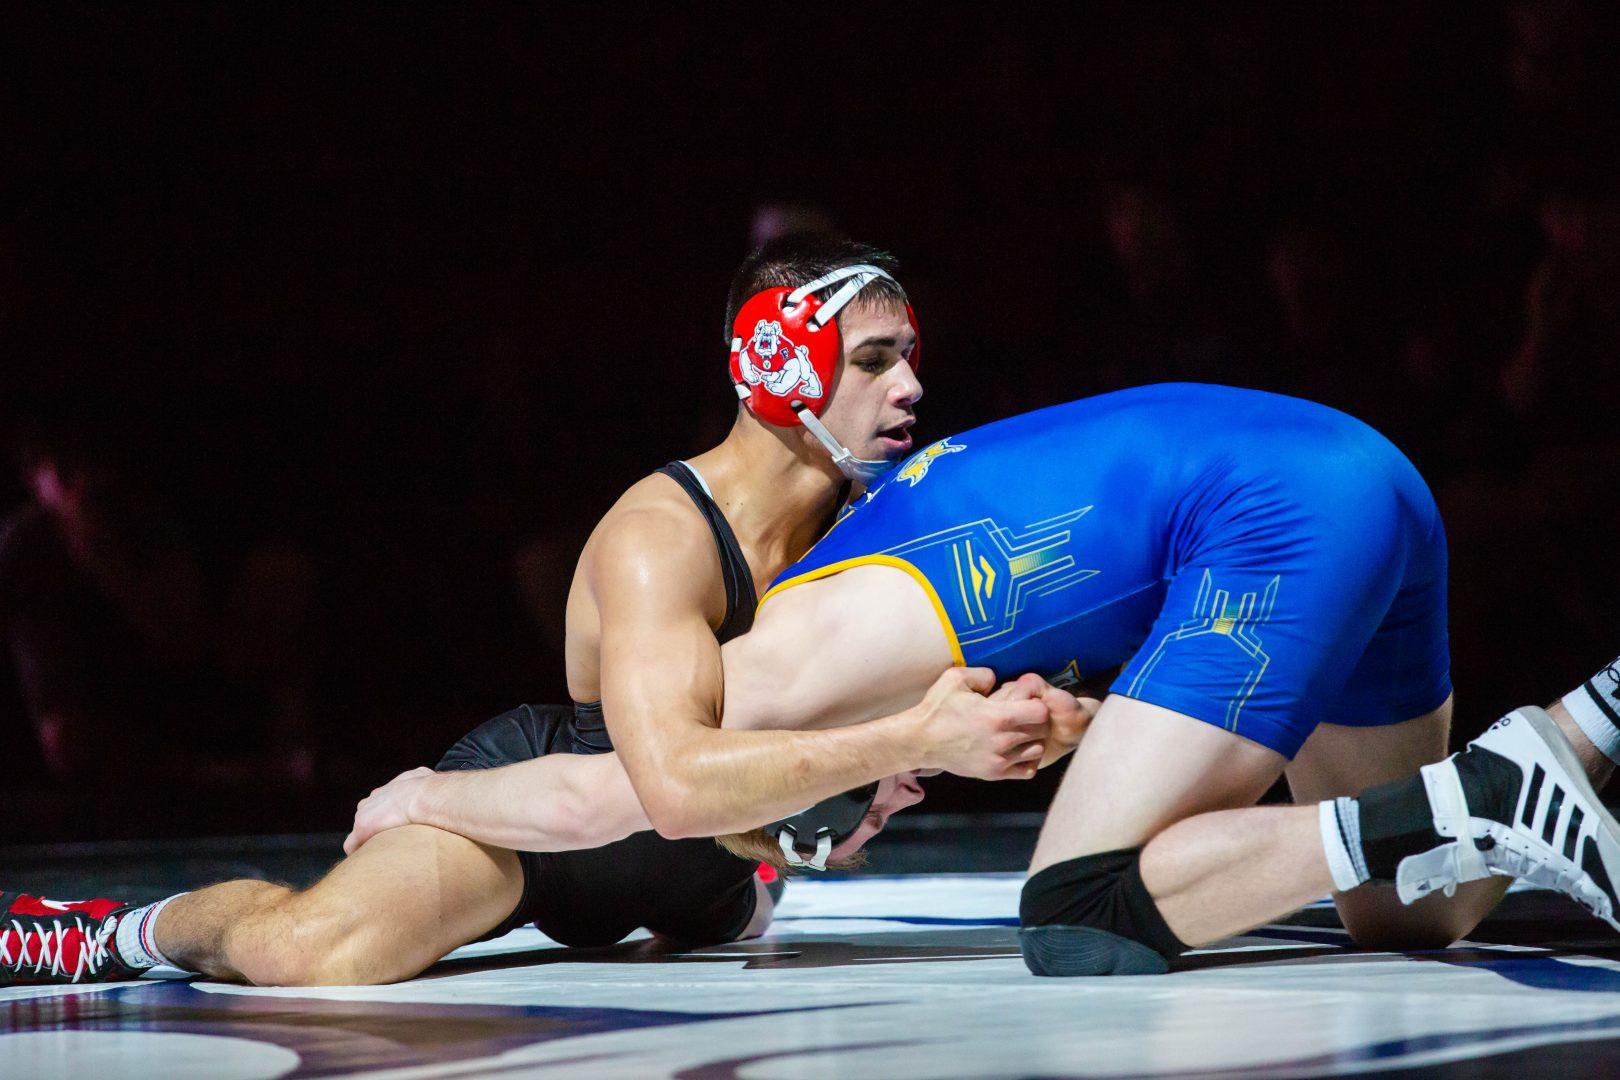 Fresno+State%E2%80%99s+Jacob+Wright%2C+one+of+the+three+wrestlers+honored%2C+defends+a+takedown+attempt+during+the+Bulldogs%E2%80%99+victory%0Aover+South+Dakota+State+at+the+Save+Mart+Center+on+Jan.+20+th+%2C+2019.+%28Jose+Romo+Jr.%2FThe%0ACollegian%29.